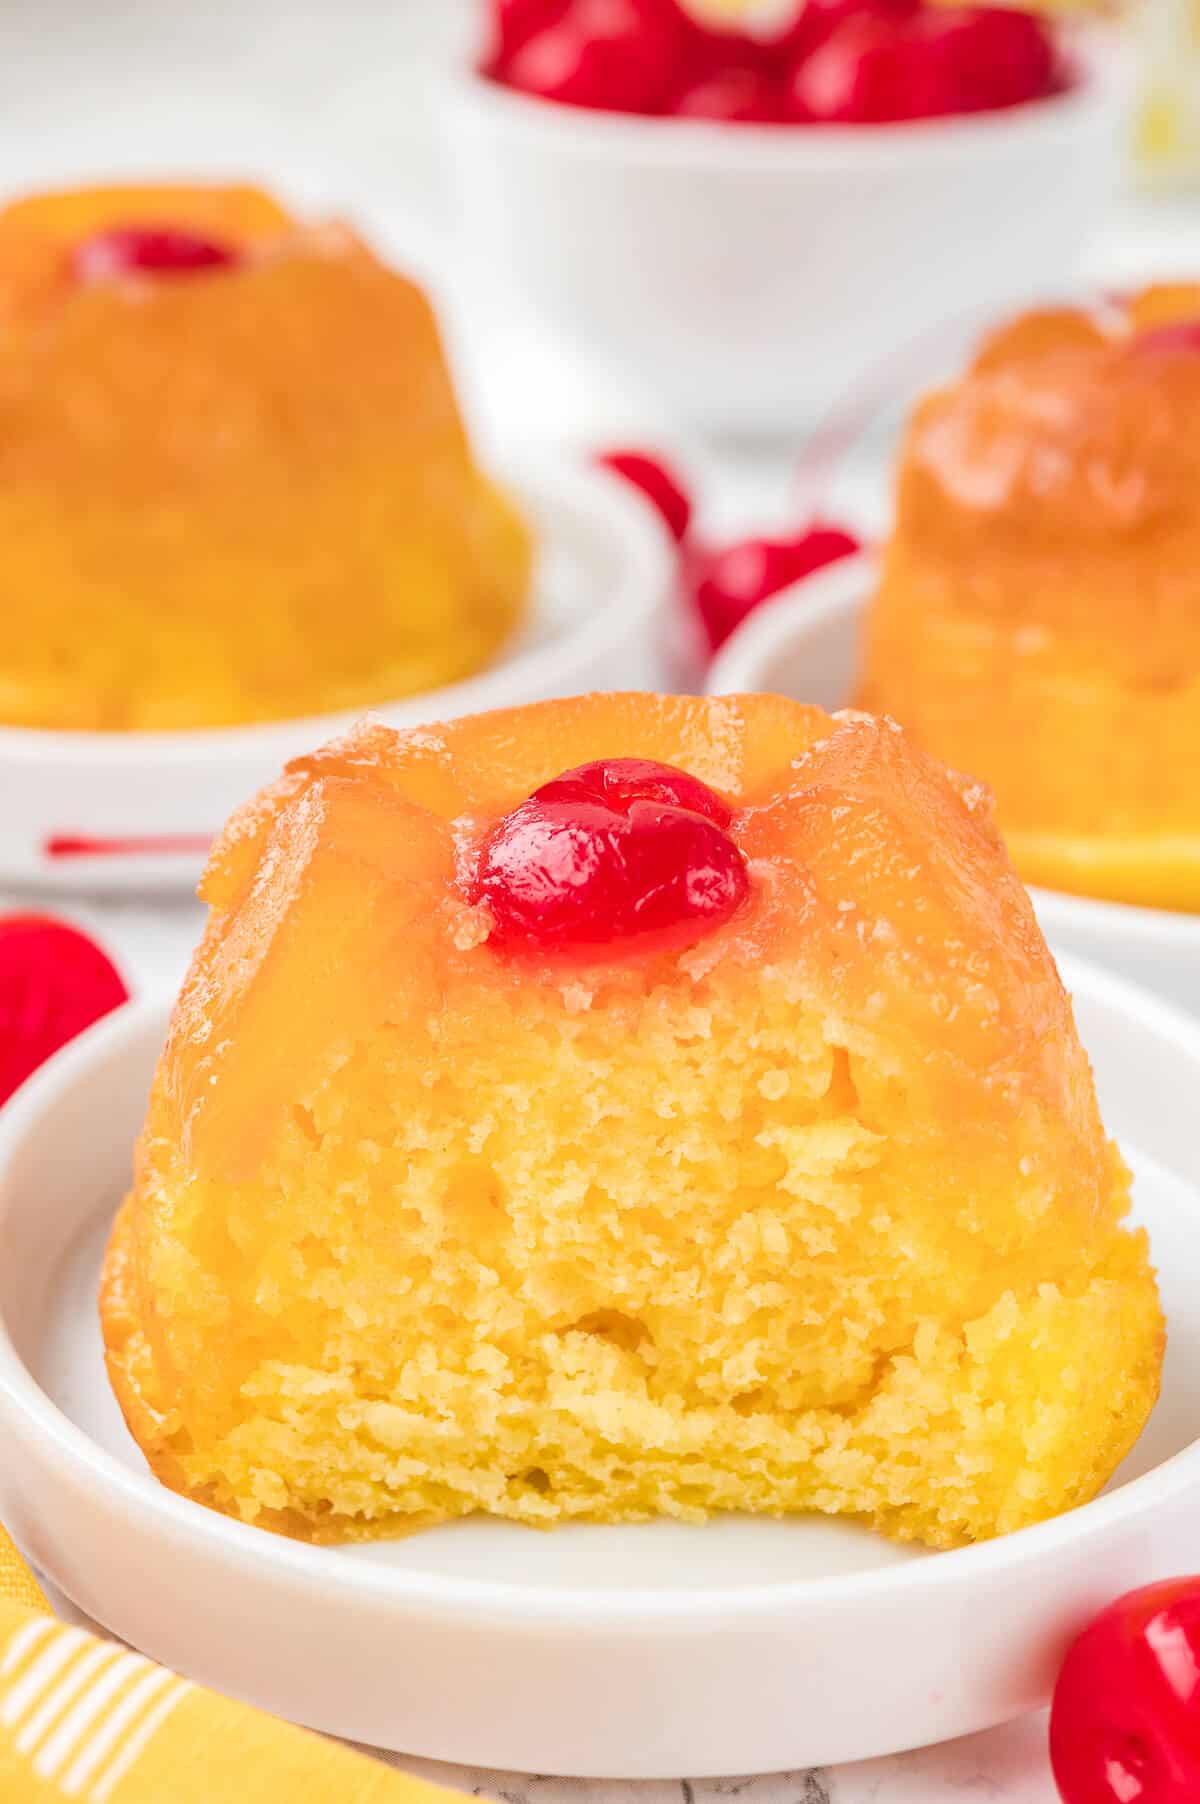 A pineapple upside down cupcake cut in half on a plate.